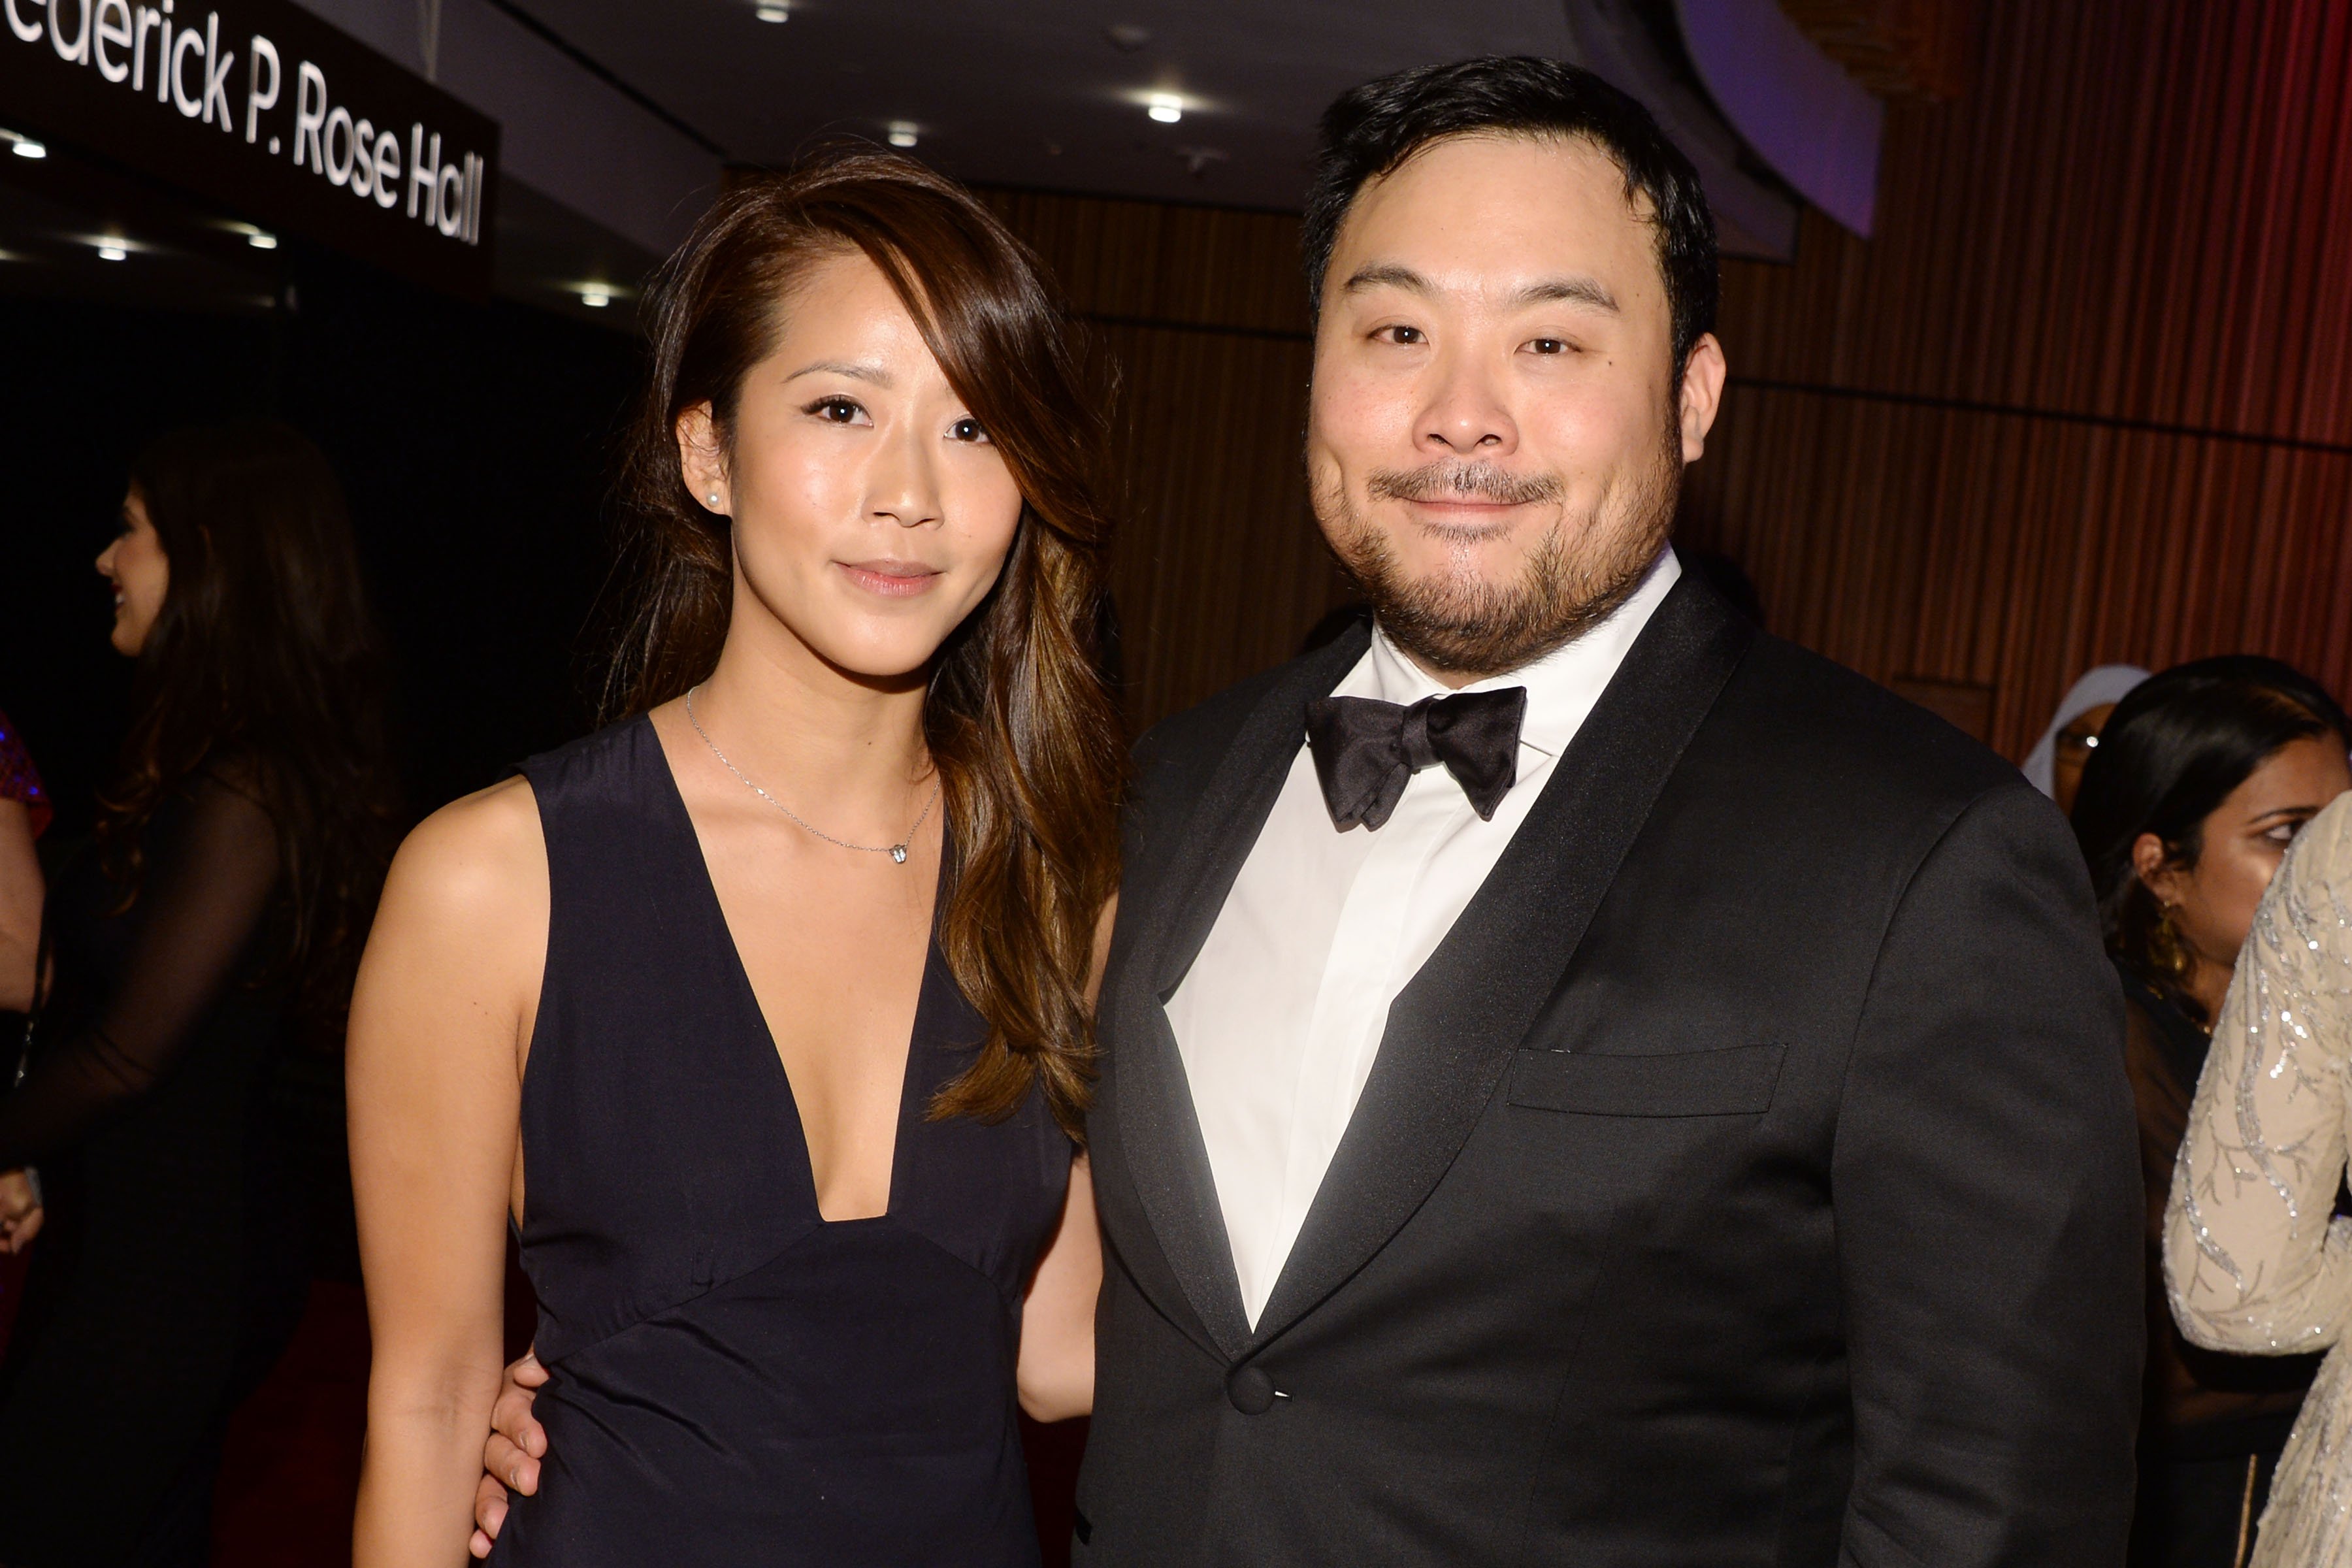 David Chang and Grace Seo at the TIME 100 gala in New York on April 26, 2016. (Clint Spaulding—Patrick McMullan/Sipa)